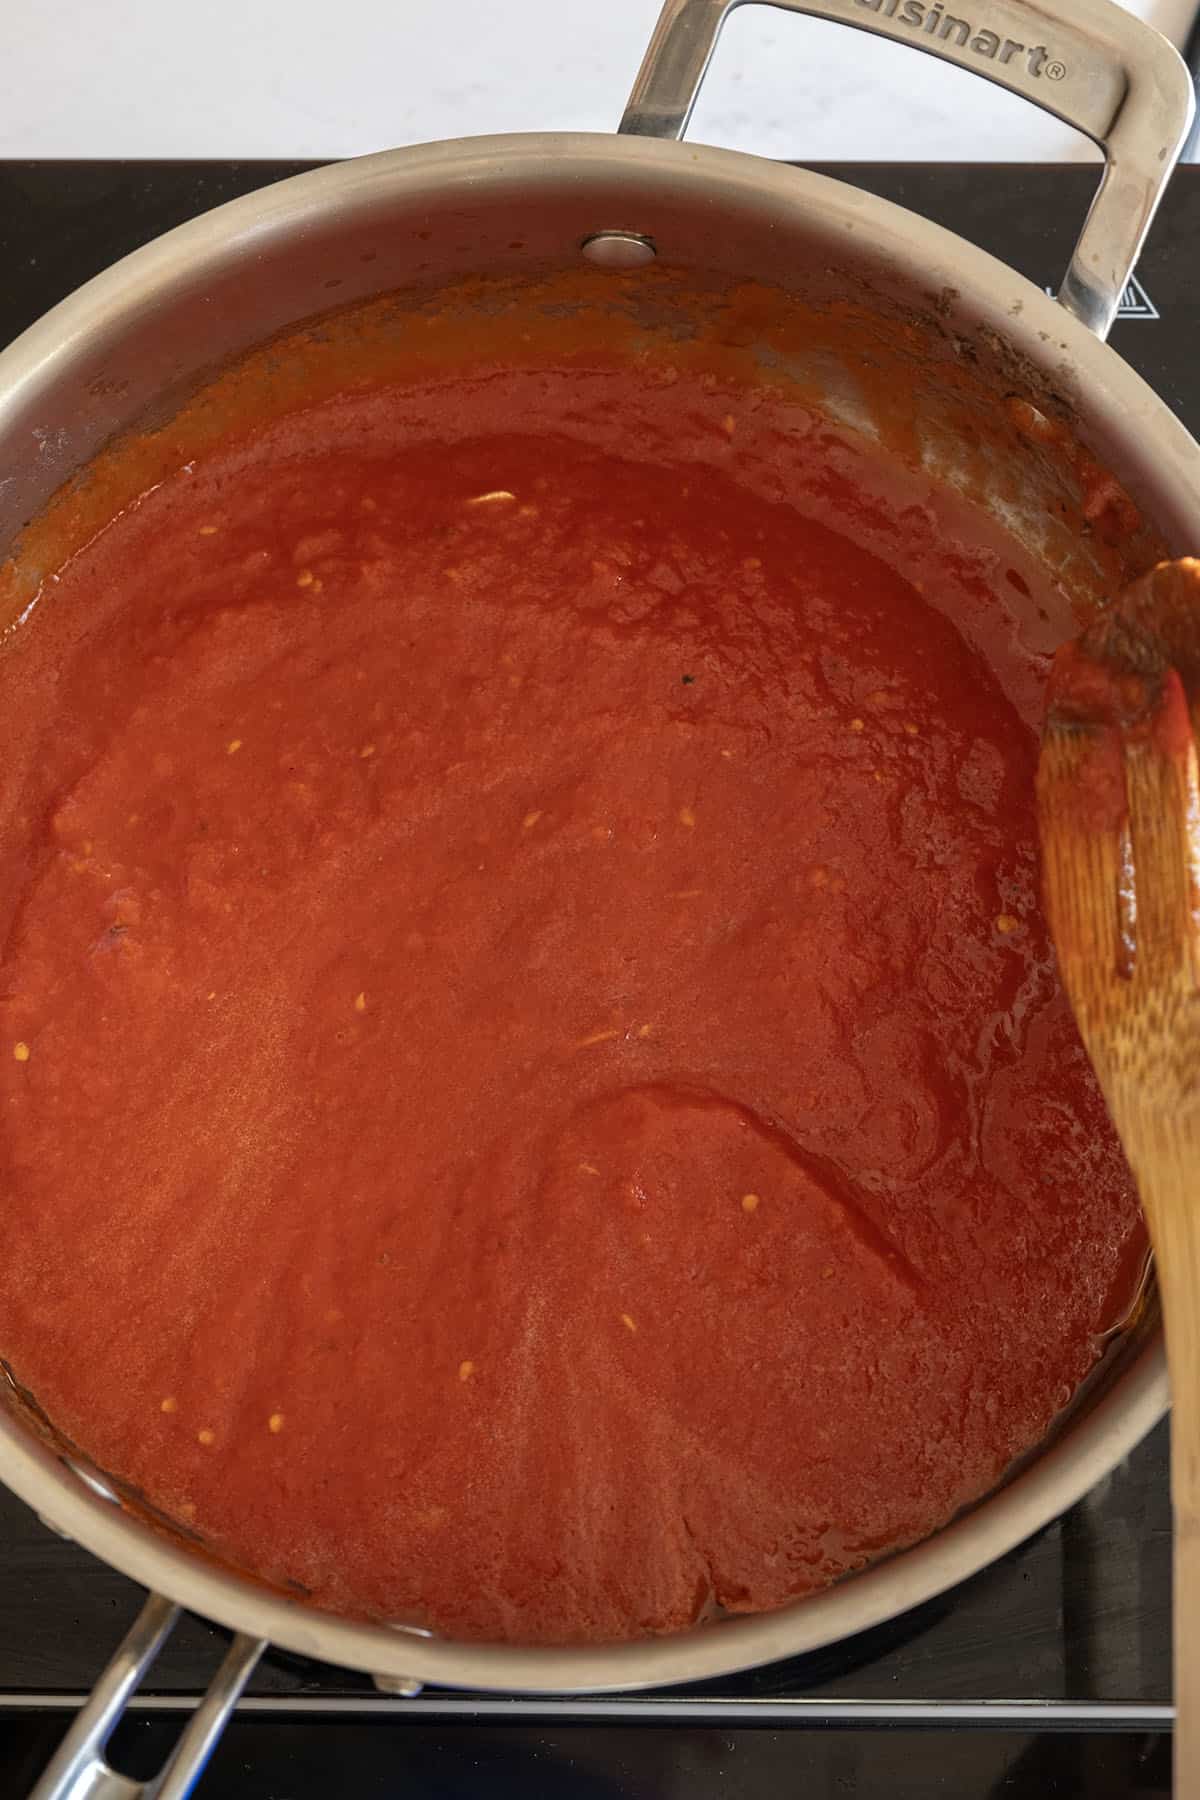 simmering the sauce